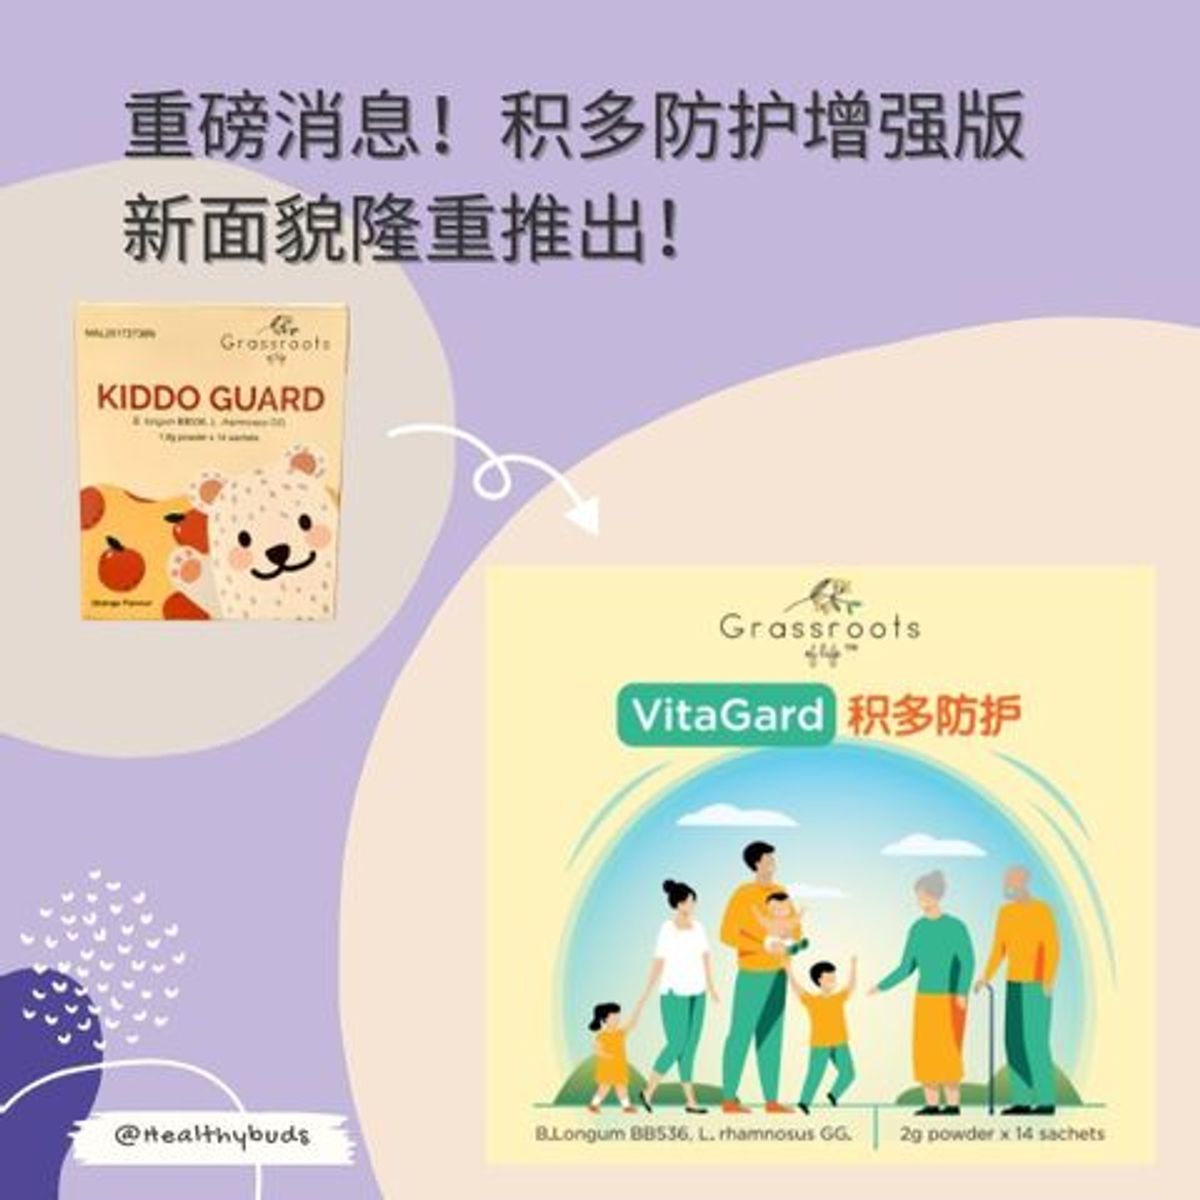 🌿 Introducing VitaGard: Boost Your Immune System with Friendly Bacteria! 增强免疫力，与友善细菌做朋友！🌿